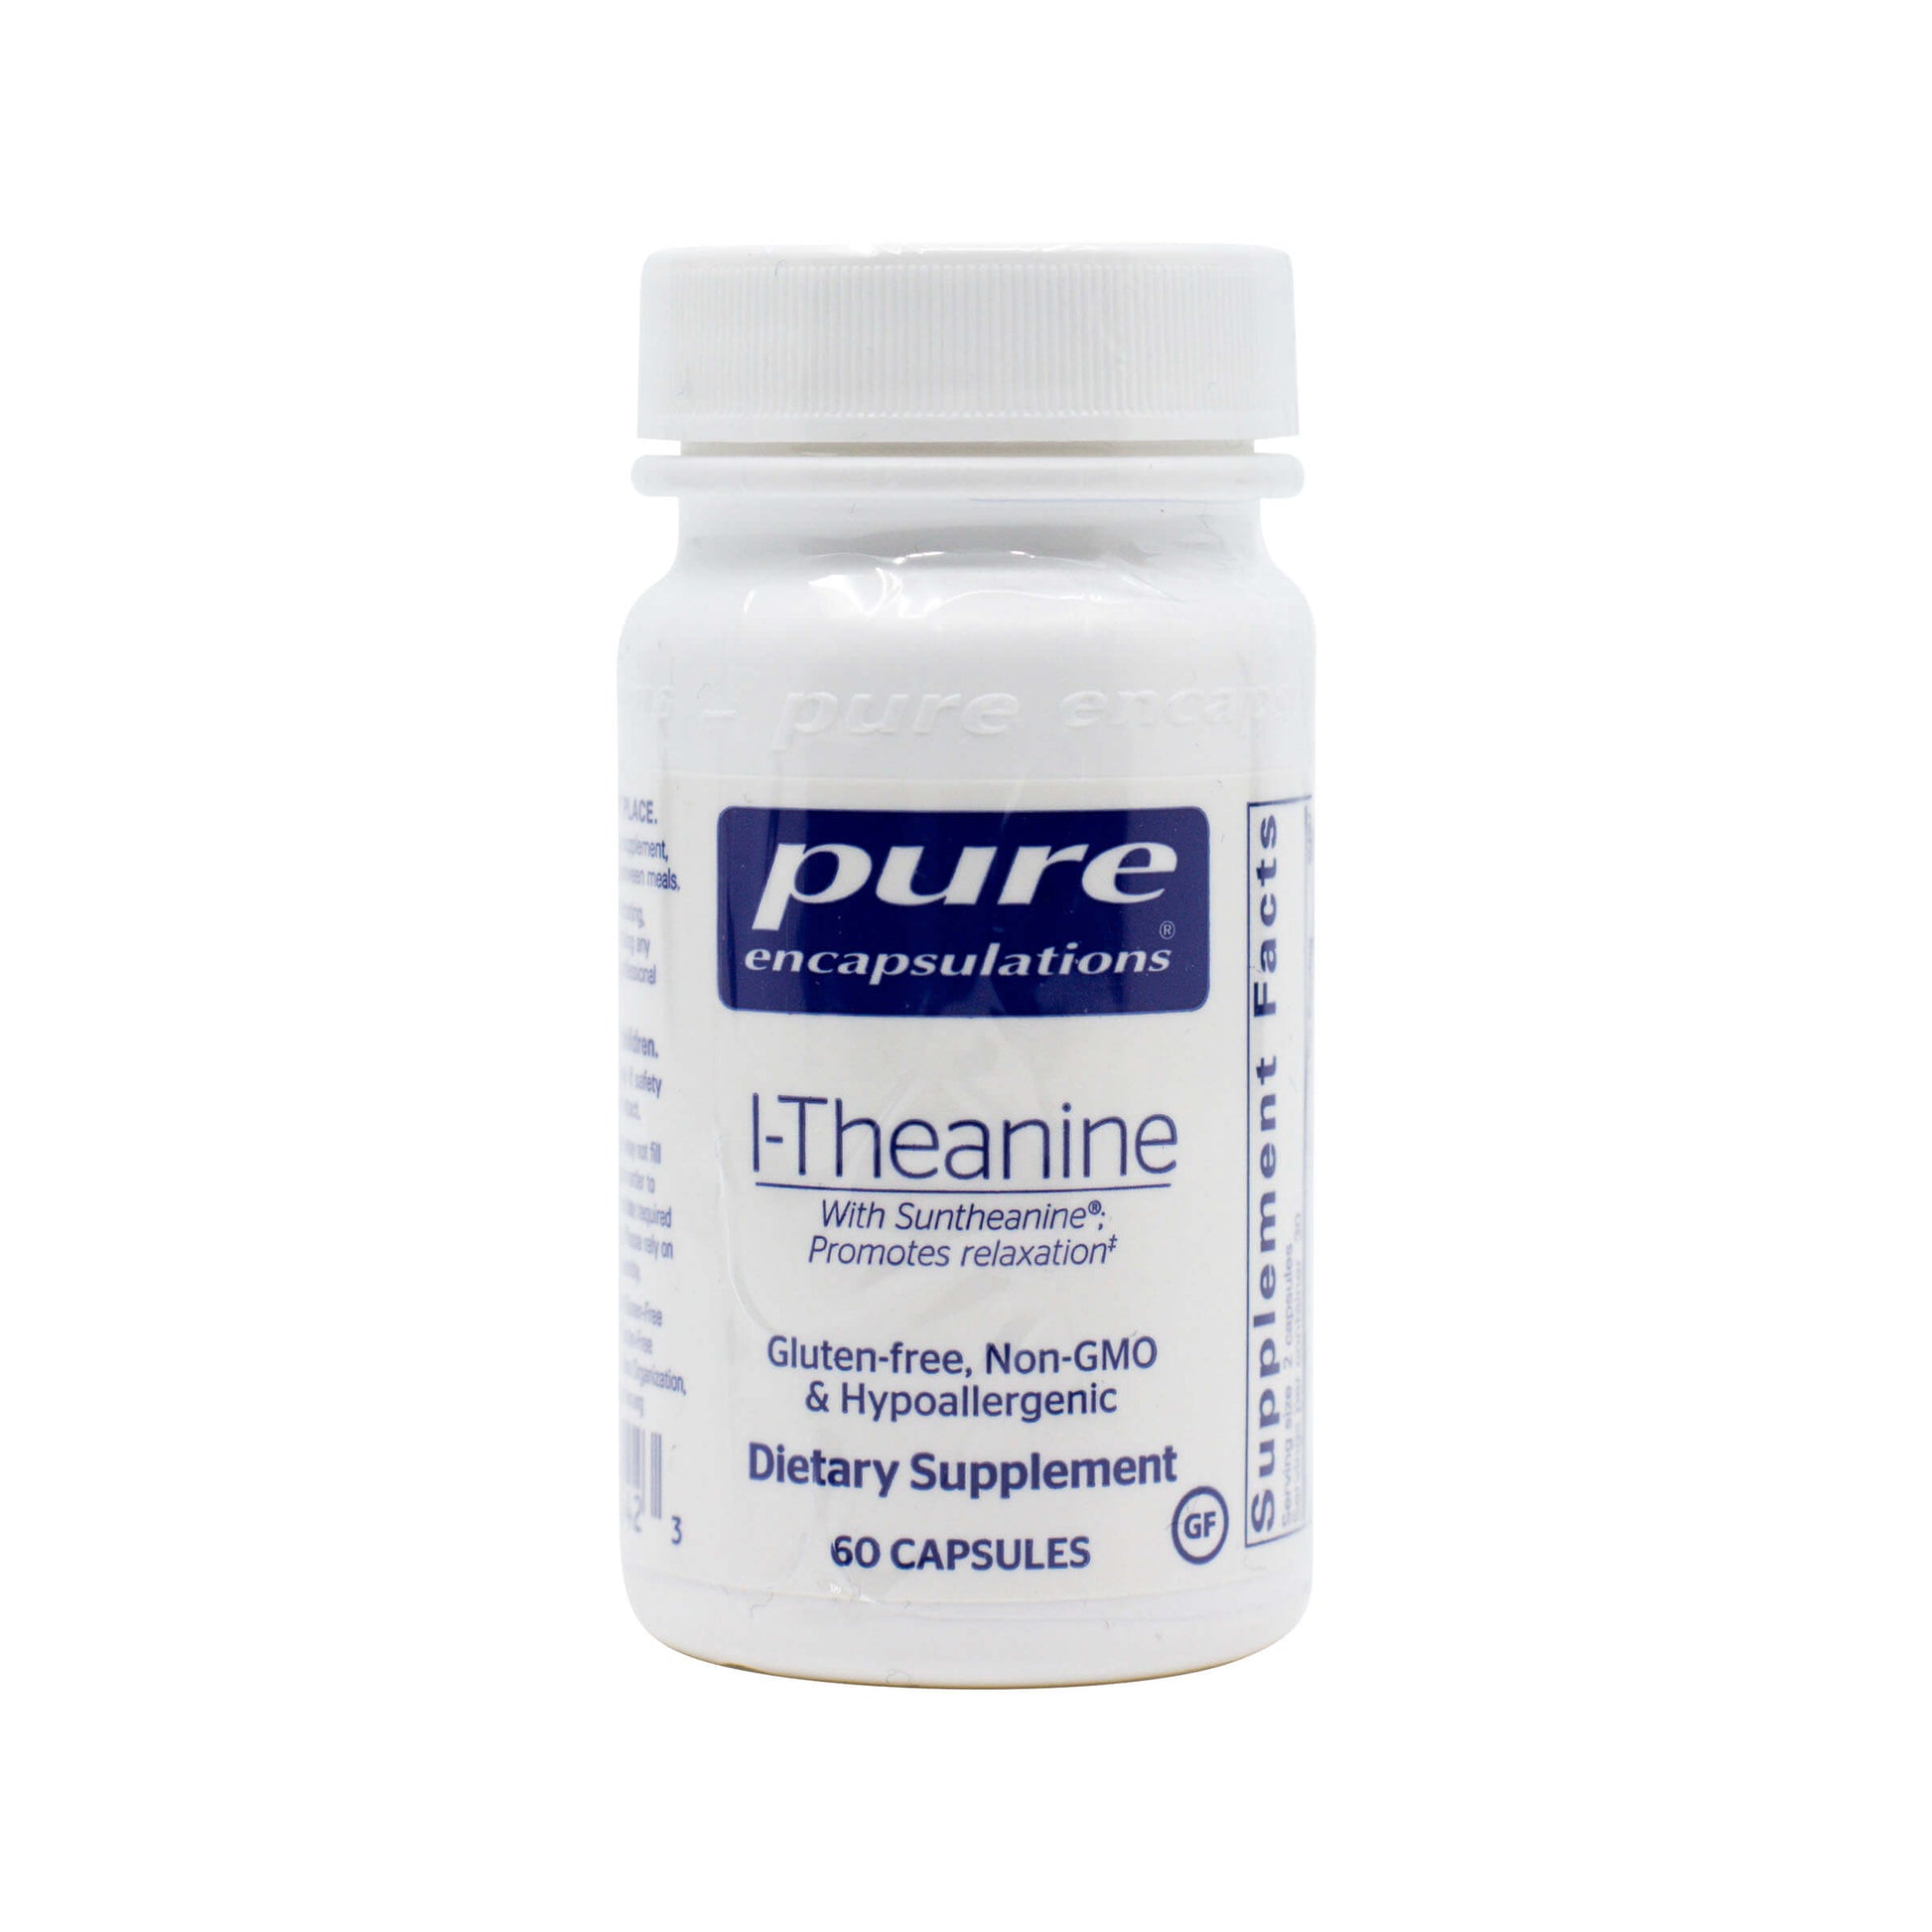 L-Theanine (Anxiety support)